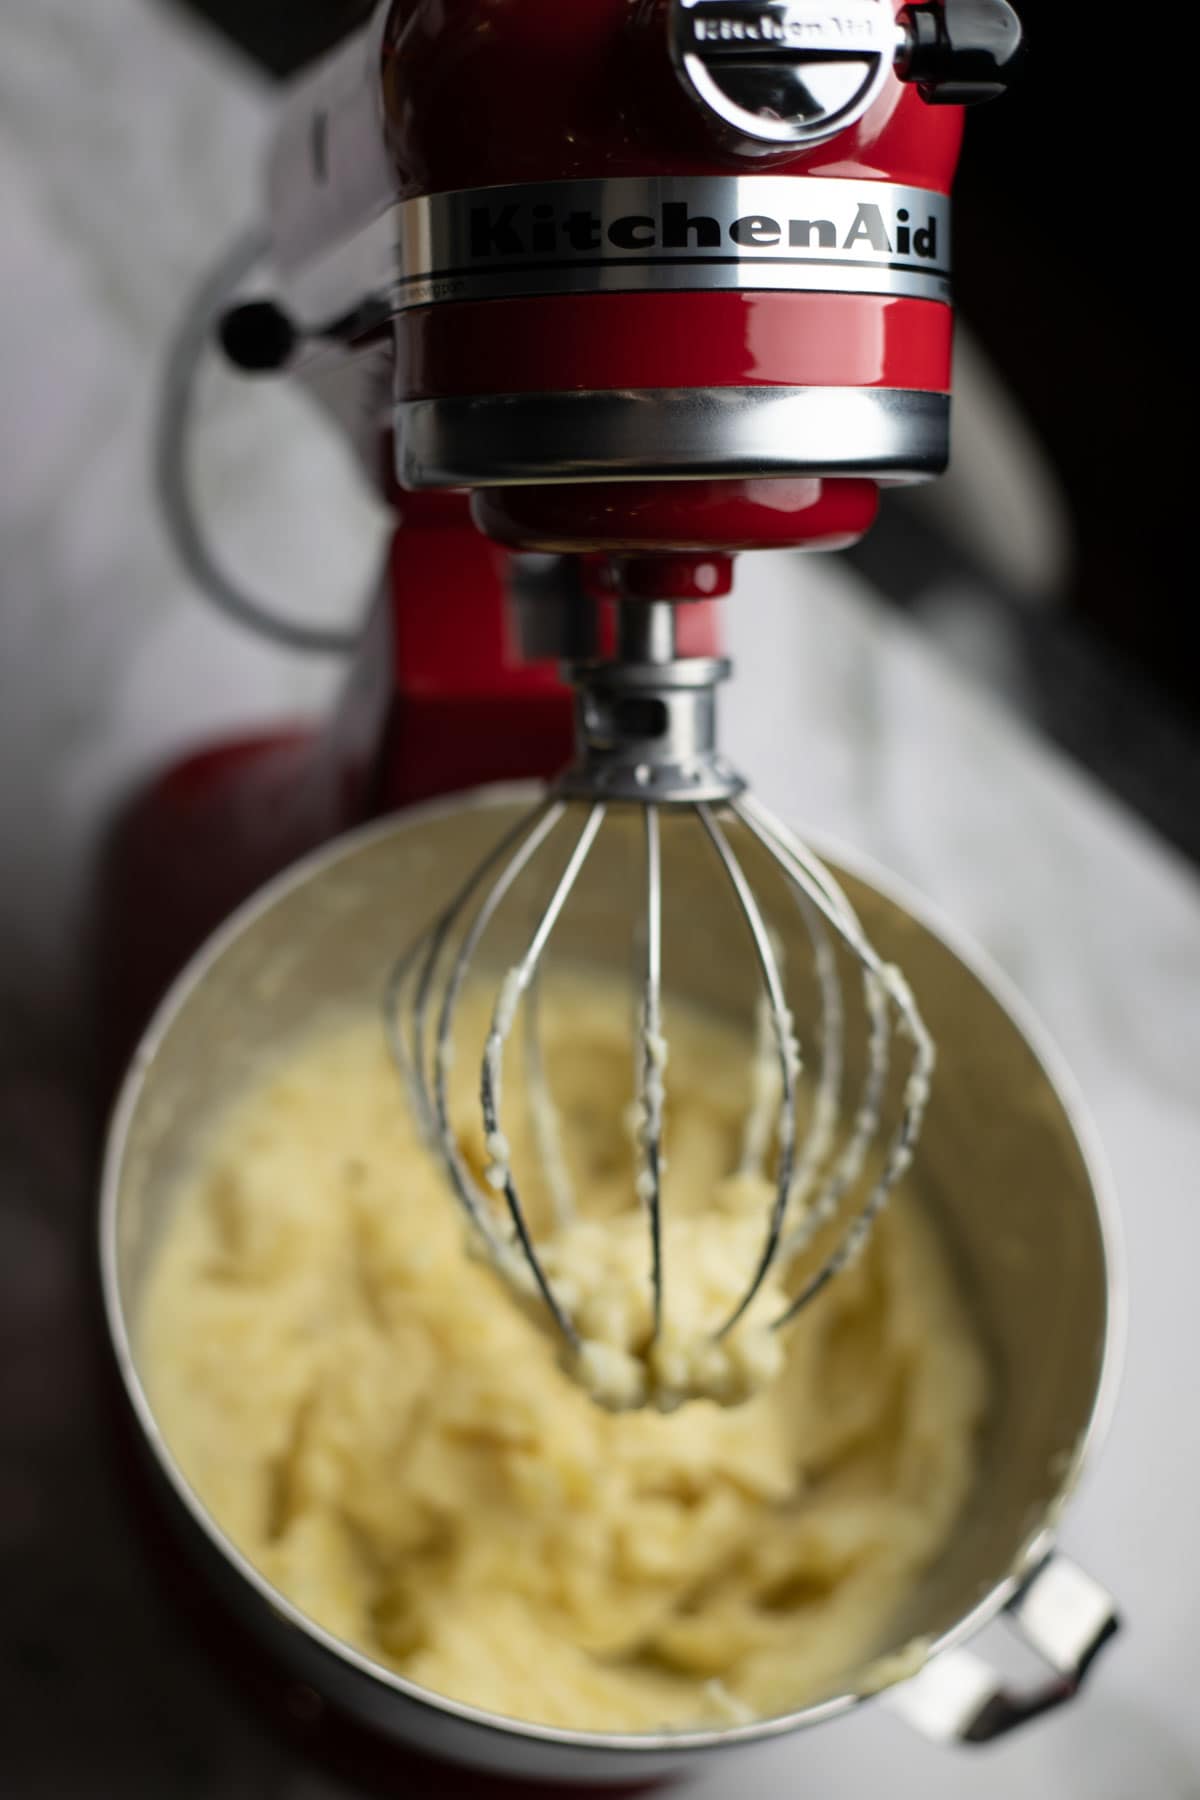 https://www.lexasrecipes.com/wp-content/uploads/2022/01/Instructions-for-KitchenAid-for-Mashed-Potatoes-Step-1-1800px-7.jpg